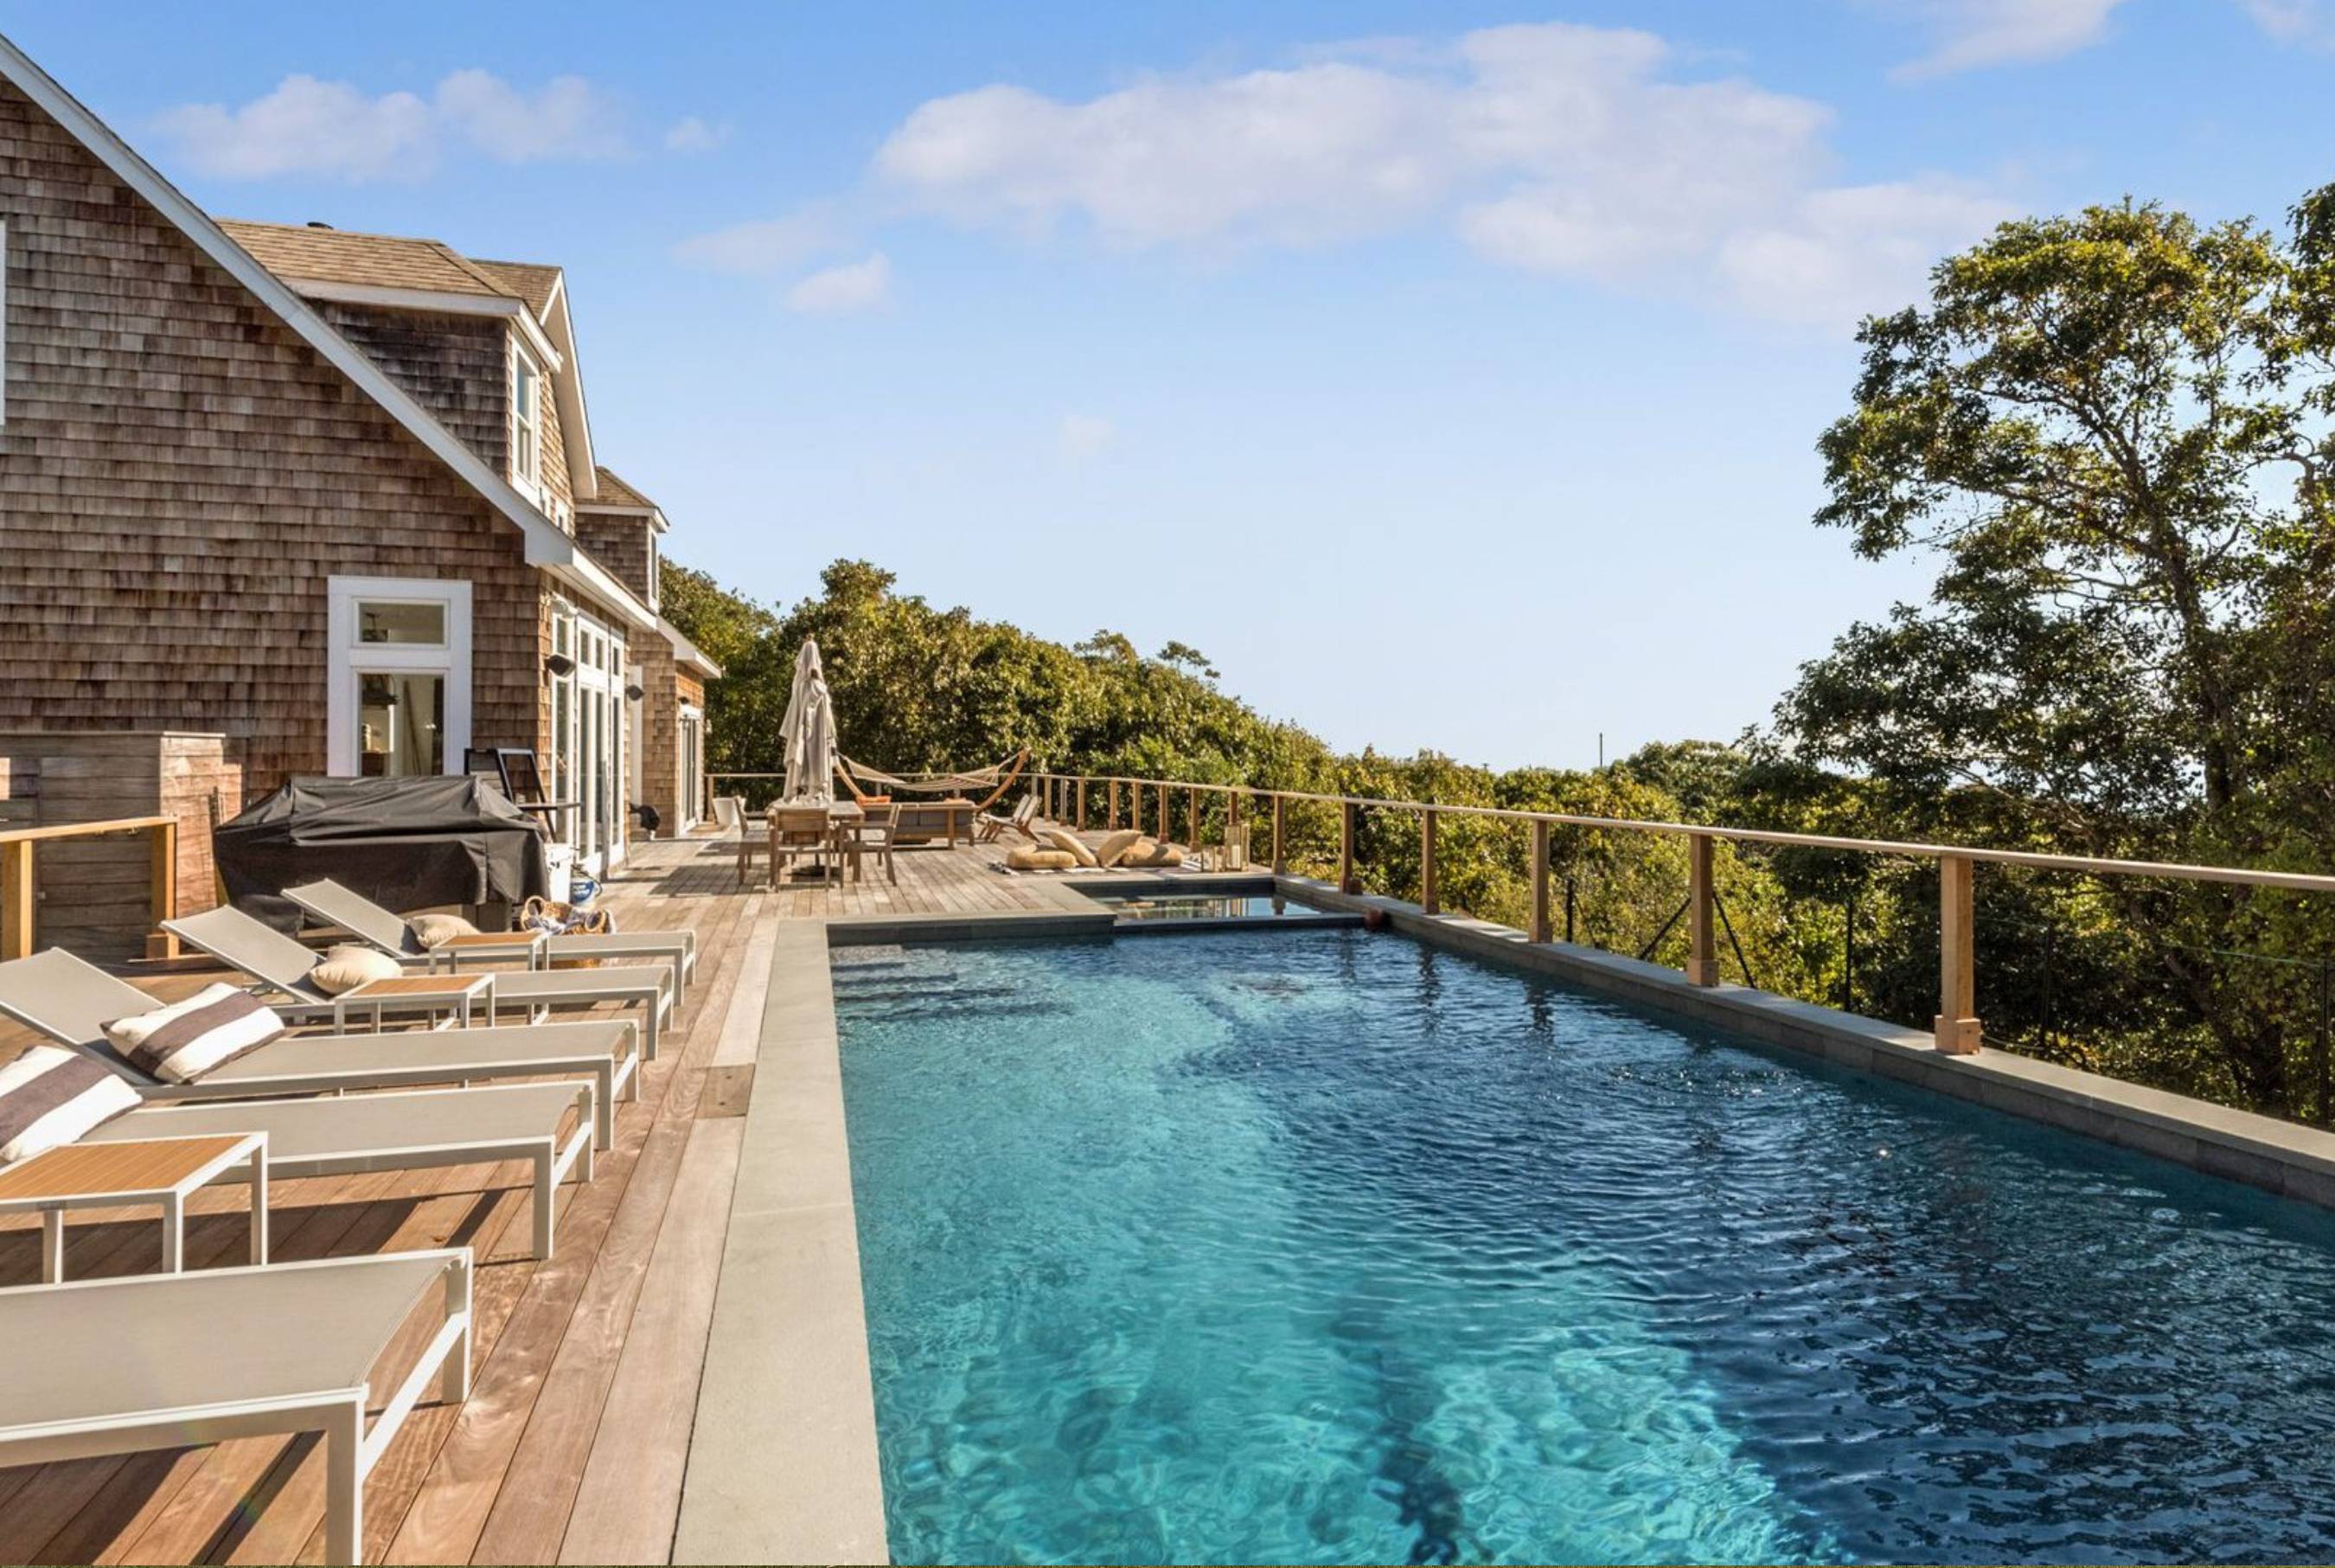 Montauk, New York – The ultimate secluded beach getaway with ocean views, heated infinity pool, sunken hot tub, art studio and movie theater. Just 2.5 hours from NYC.